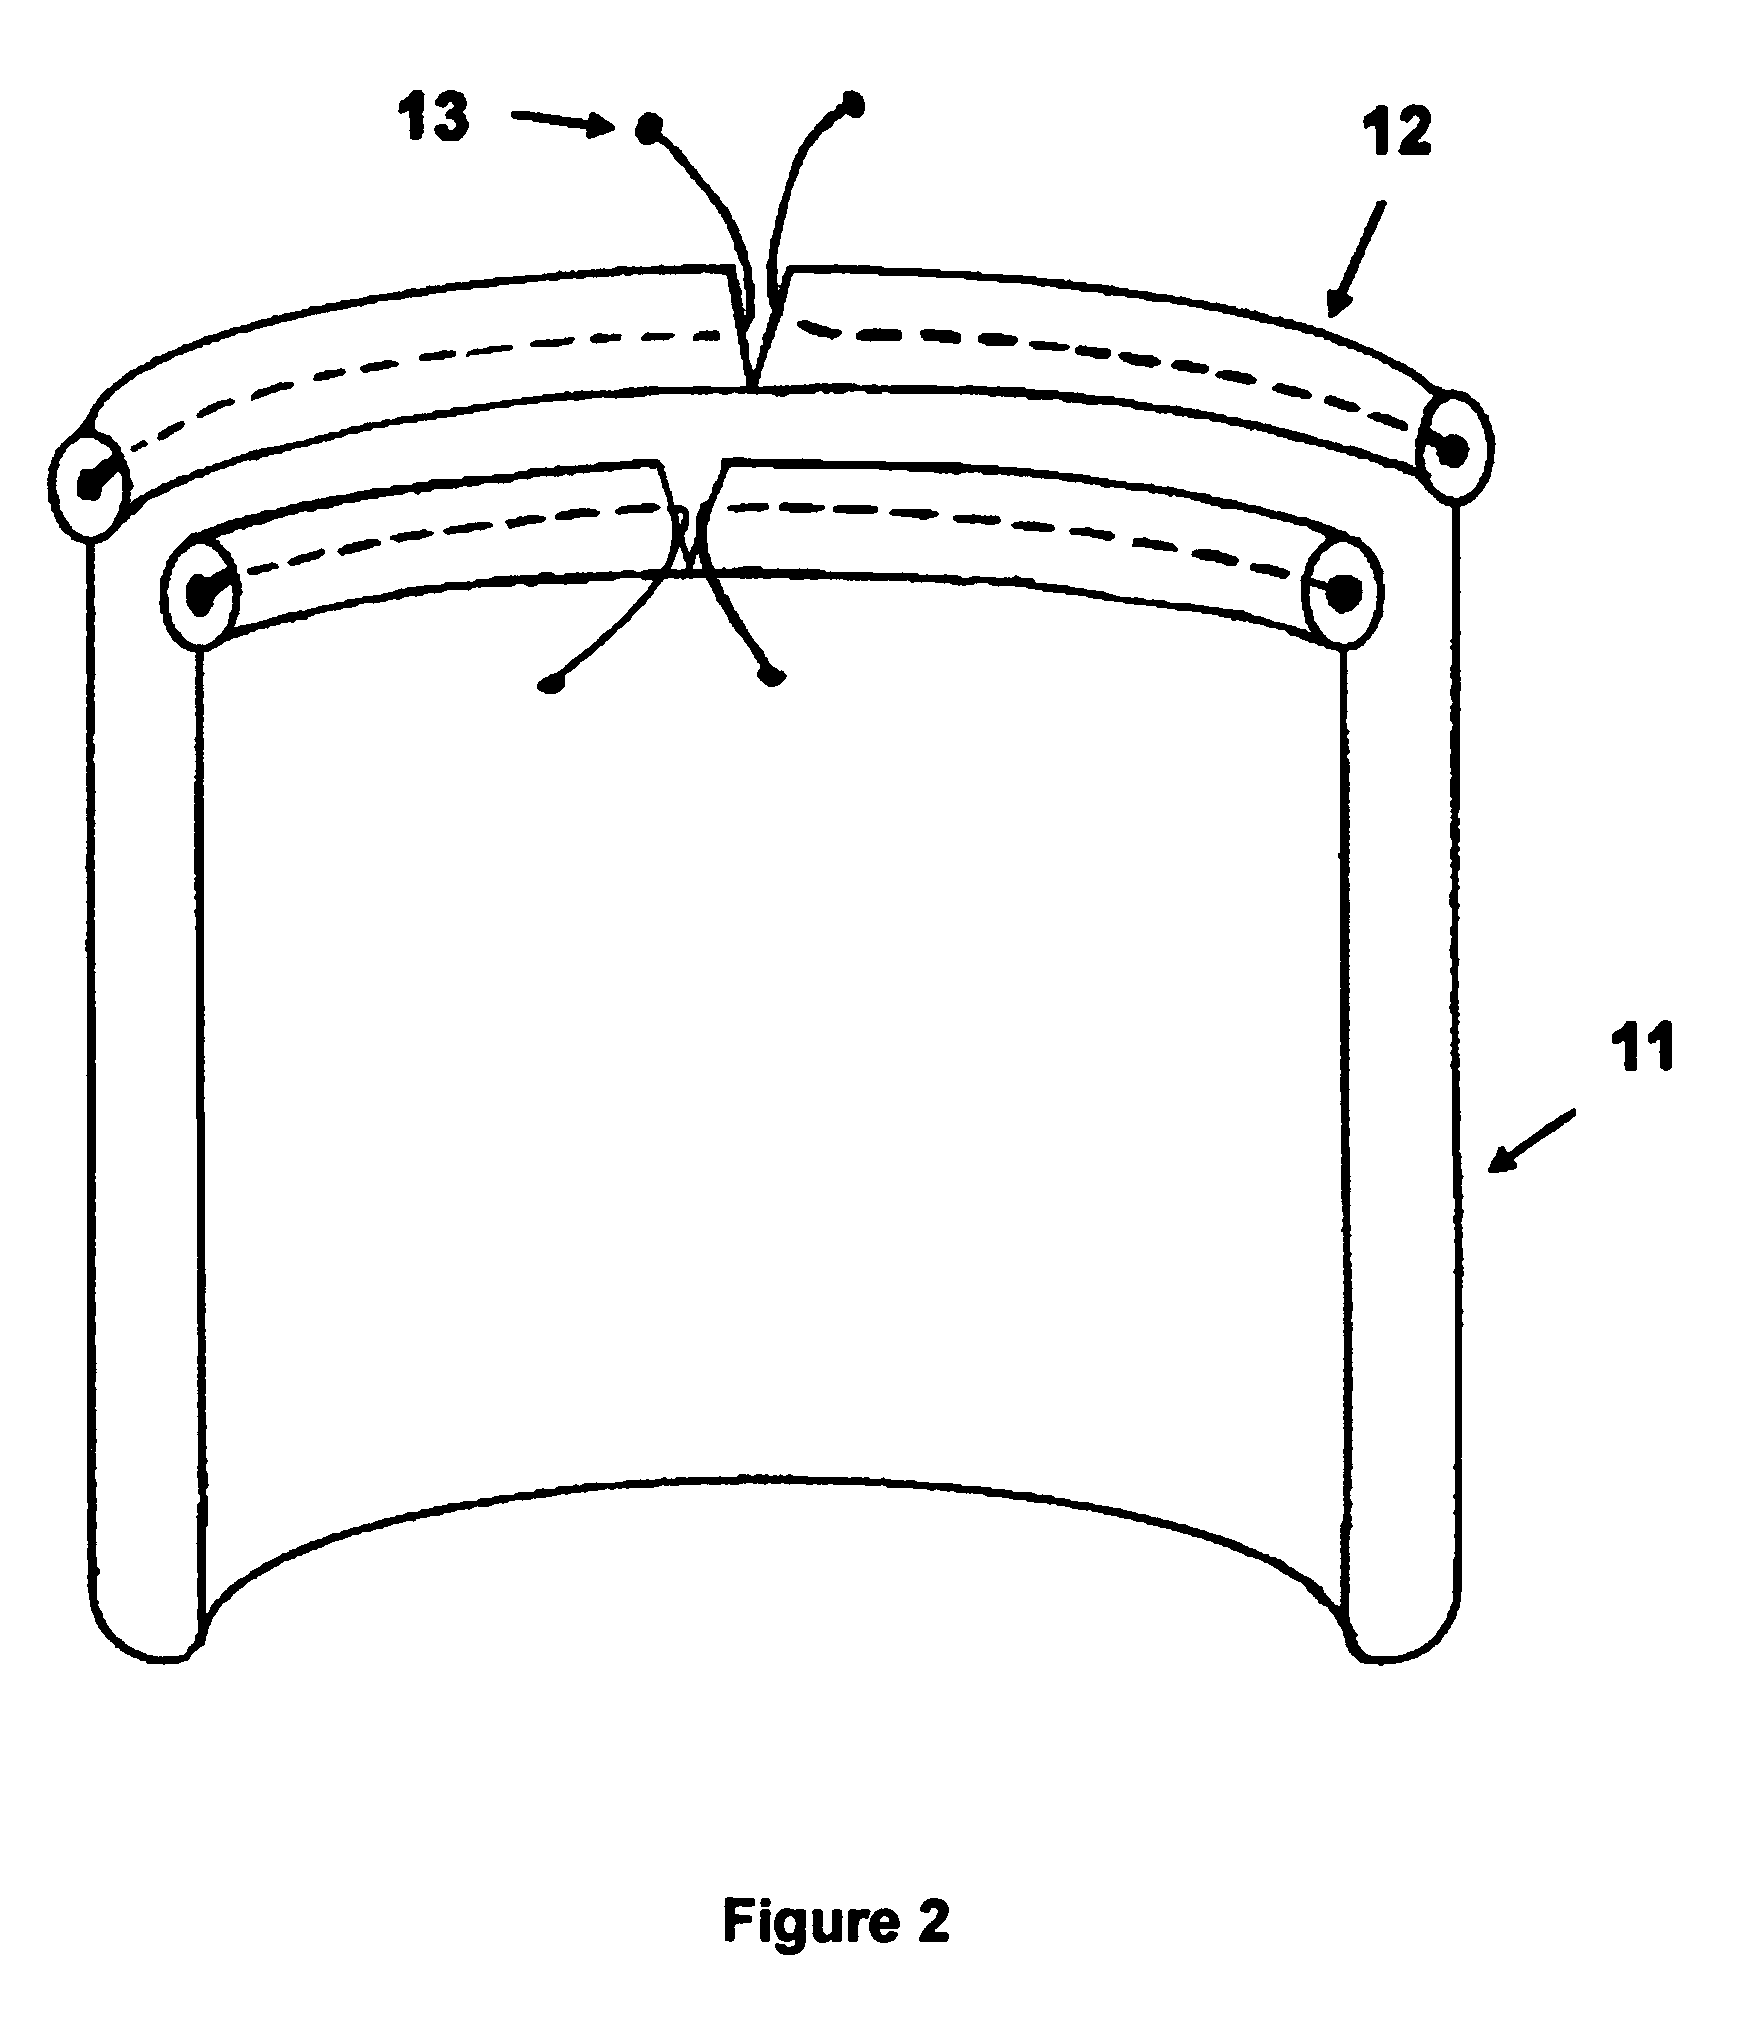 Apparatus and method for washing fibers